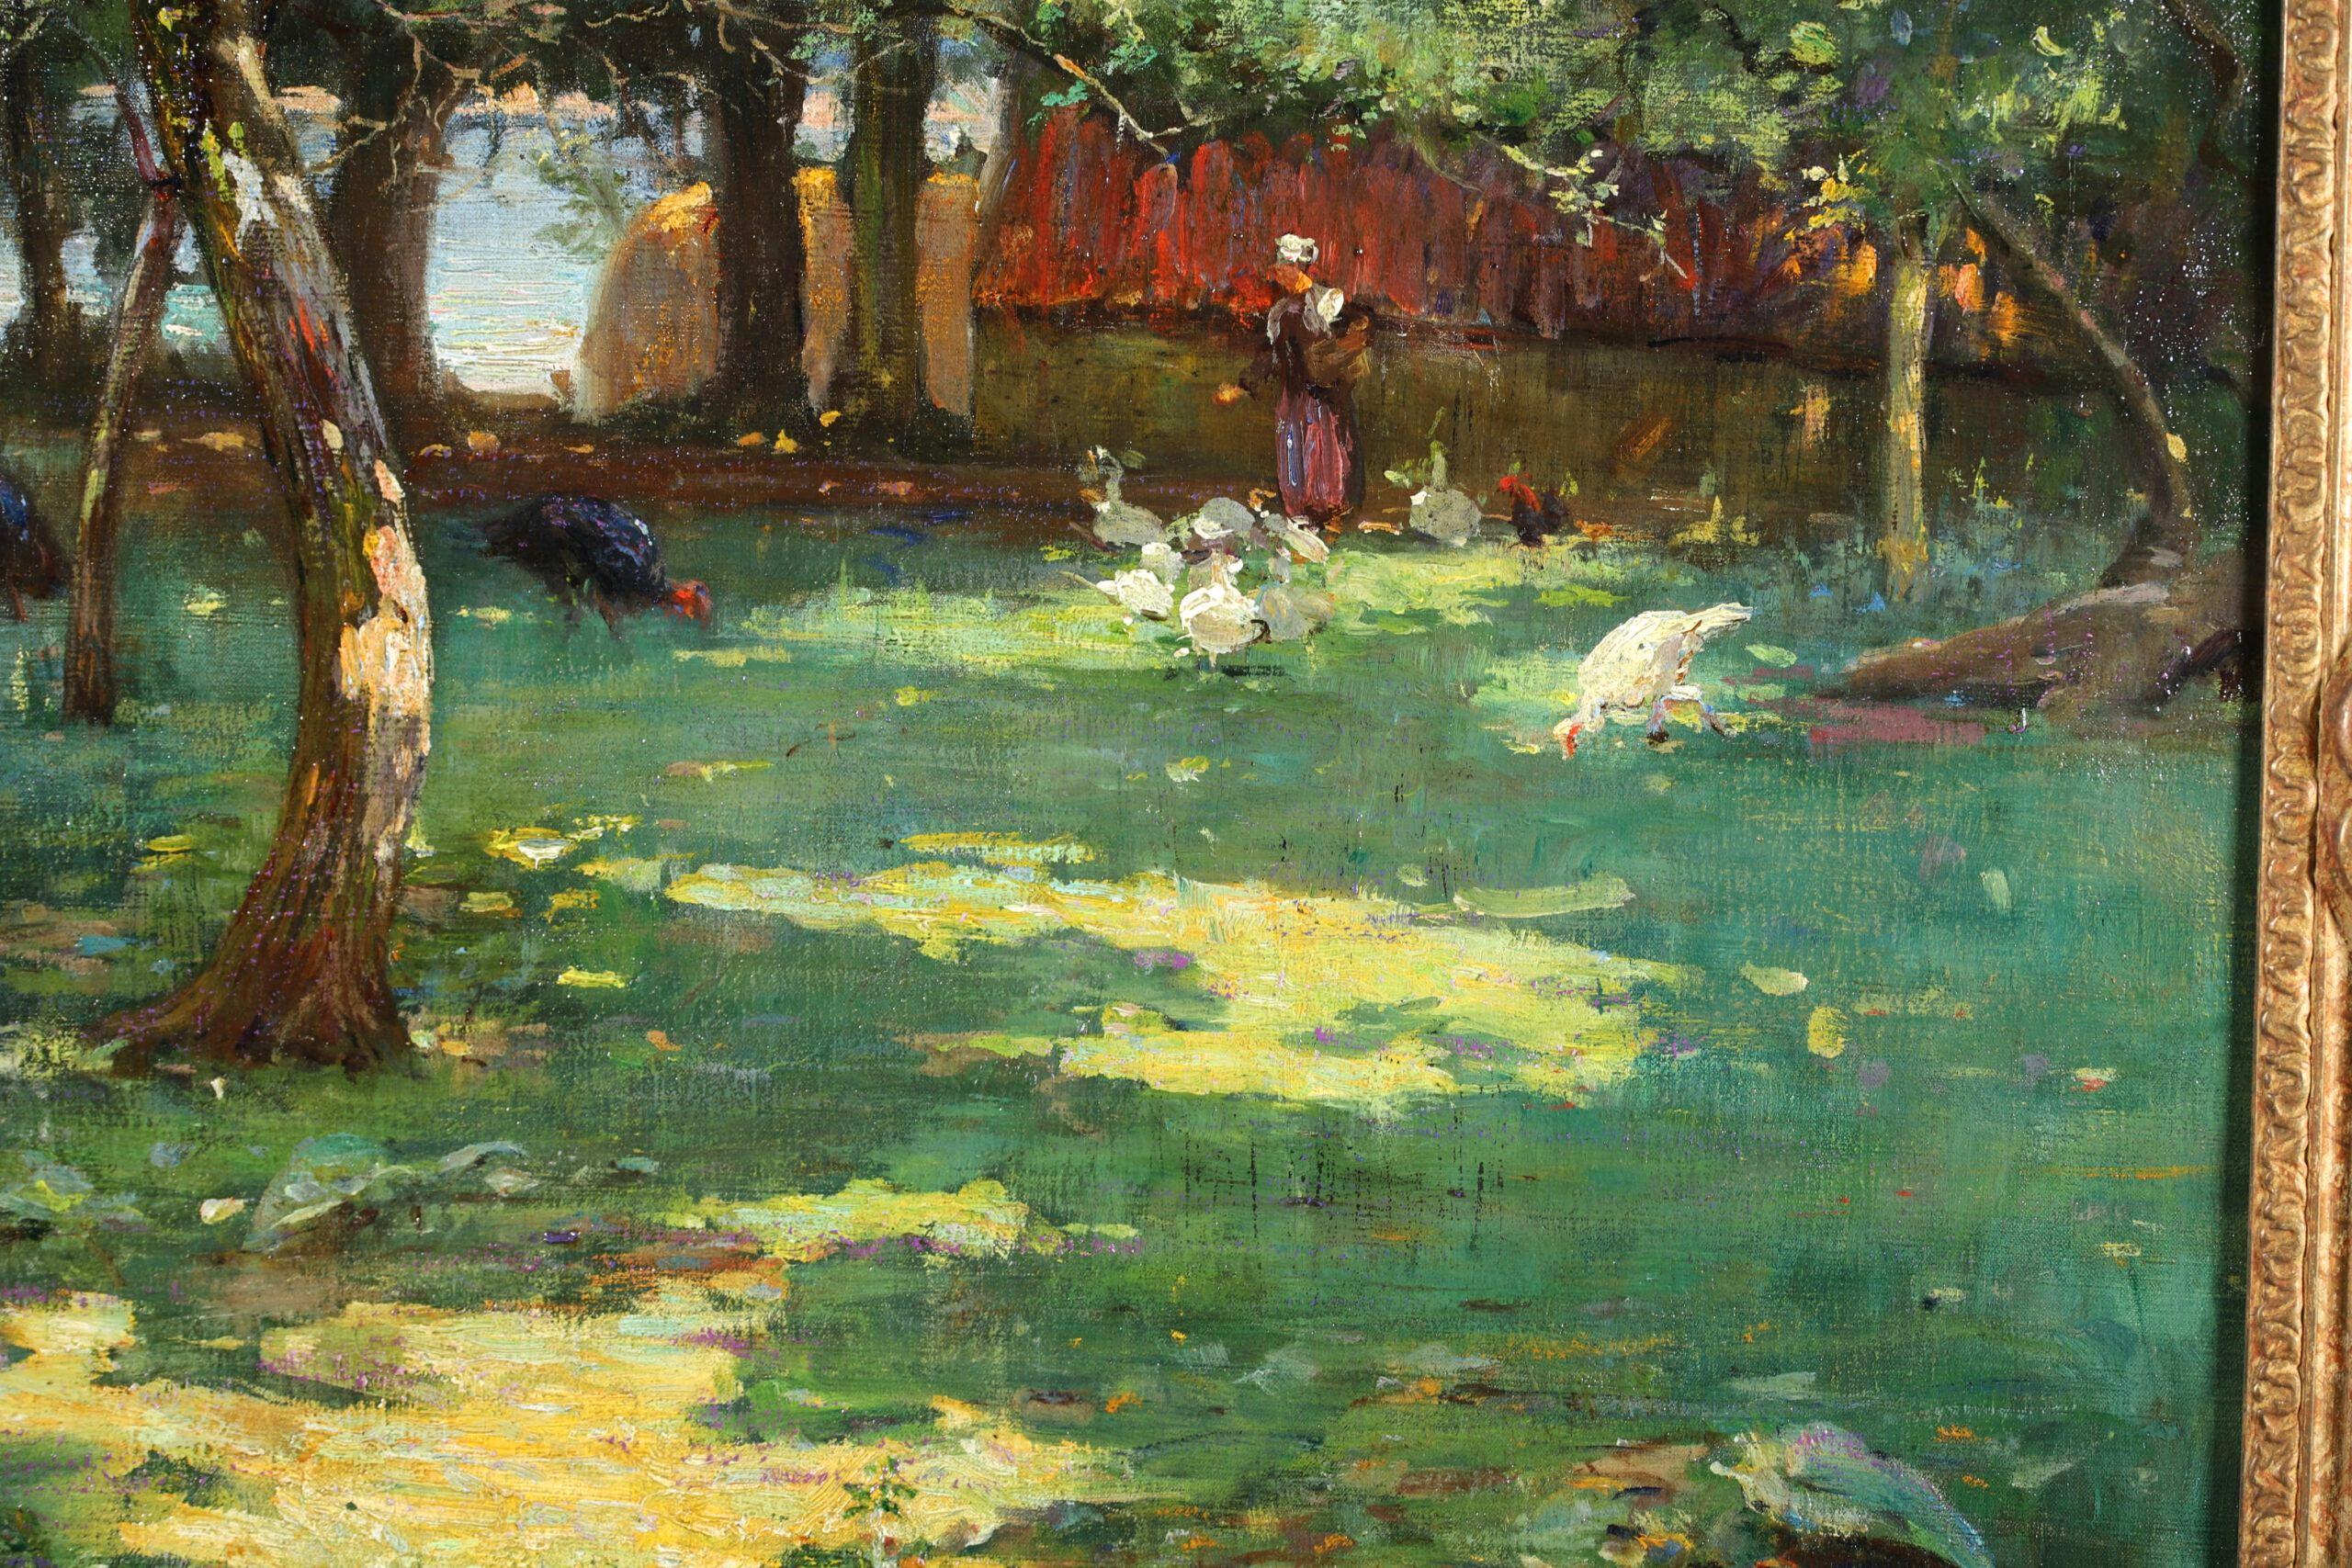 Signed oil on canvas animals in landscape by Canadian impressionist painter Margaret Campbell Macpherson. This charming piece depicts a Breton girl in traditional clothing feeding turkeys and hens in an orchard. 

Signature:
Signed lower